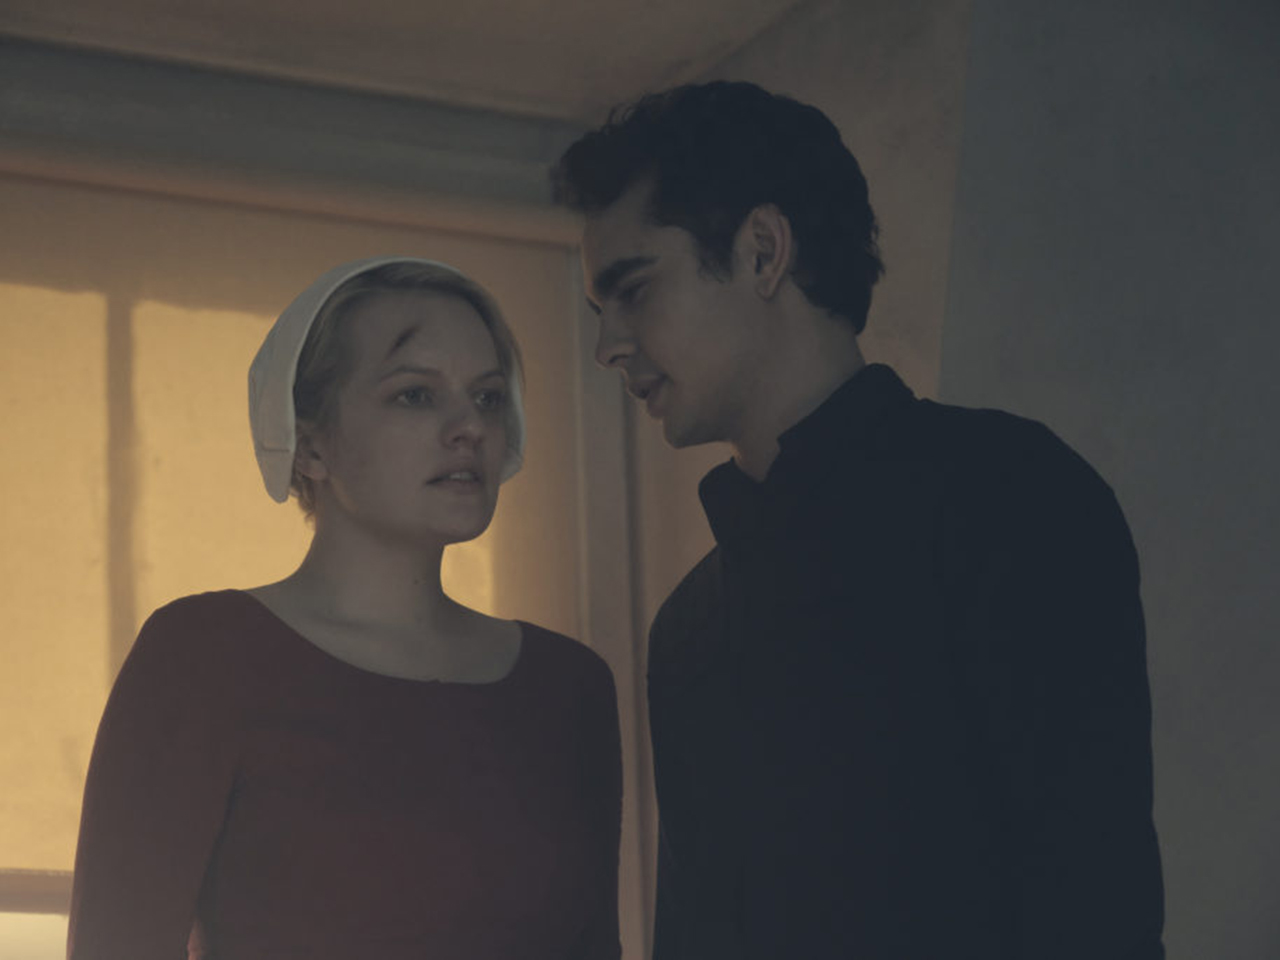 The Handmaid's Tale second season teaser trailer. The Handmaid's Tale -- "Night" -- Episode 110 -- Serena Joy confronts Offred and the Commander. Offred struggles with a complicated, life-changing revelation. The Handmaids face a brutal decision. Offred (Elisabeth Moss) and Nick (Max Minghella), shown. (Photo by: George Kraychyk/Hulu)